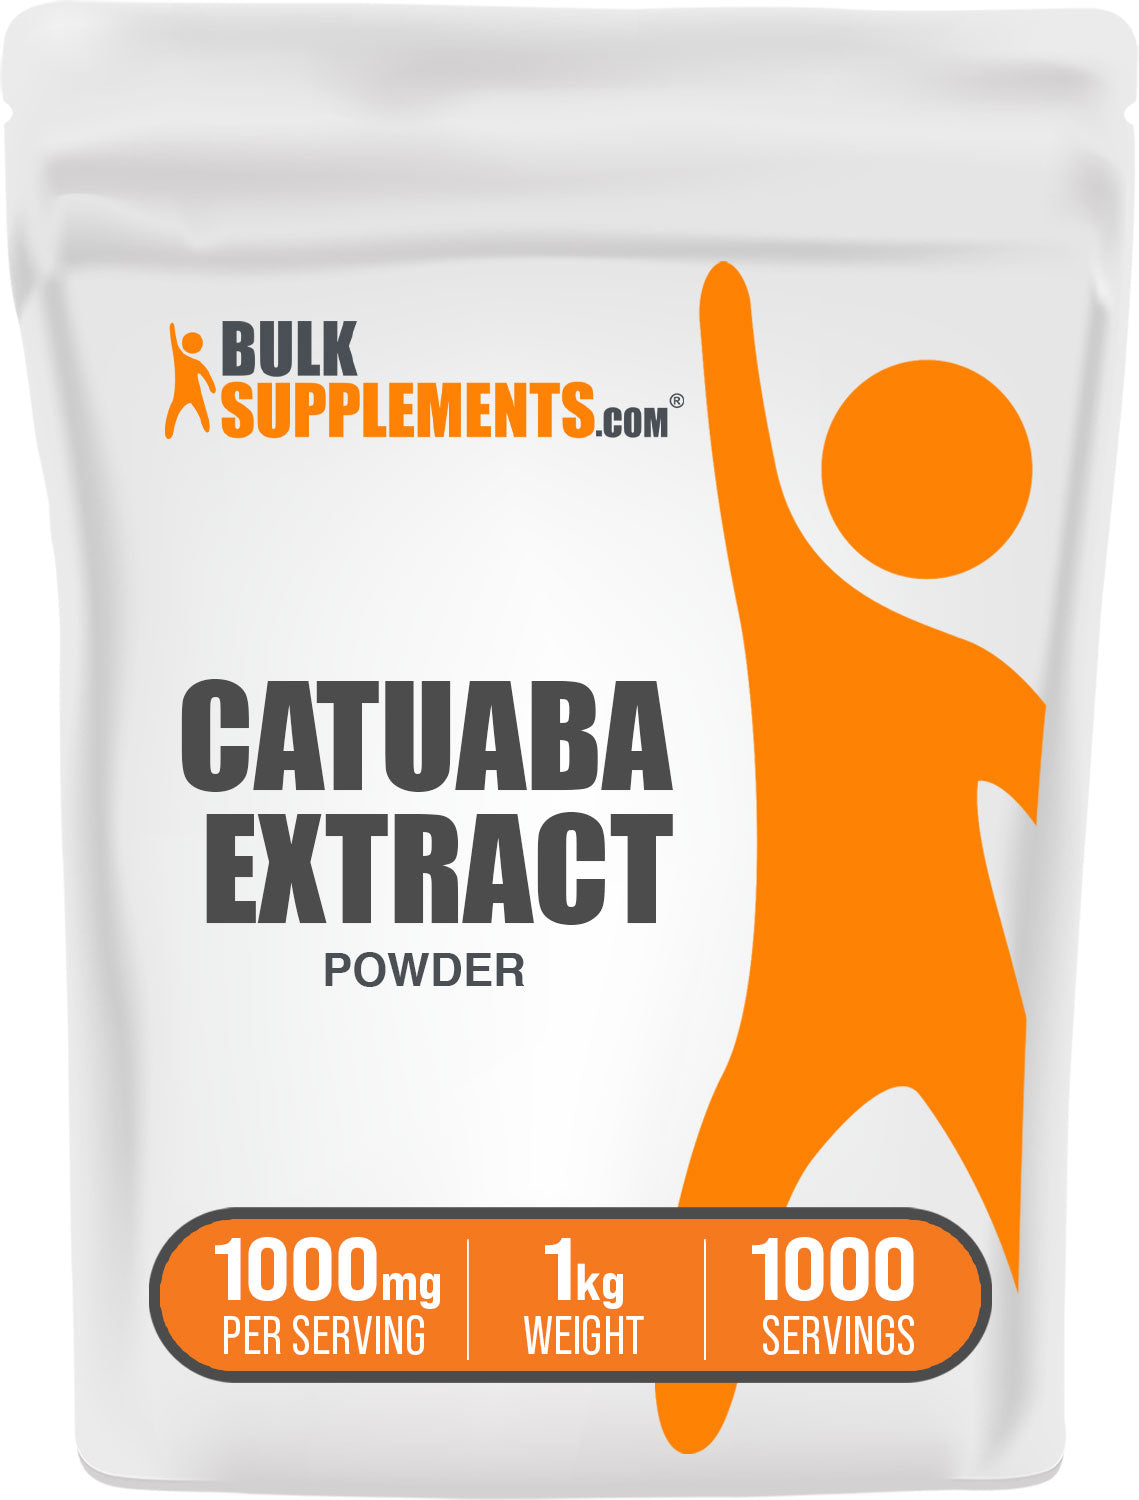 1kg of Catuaba Extract